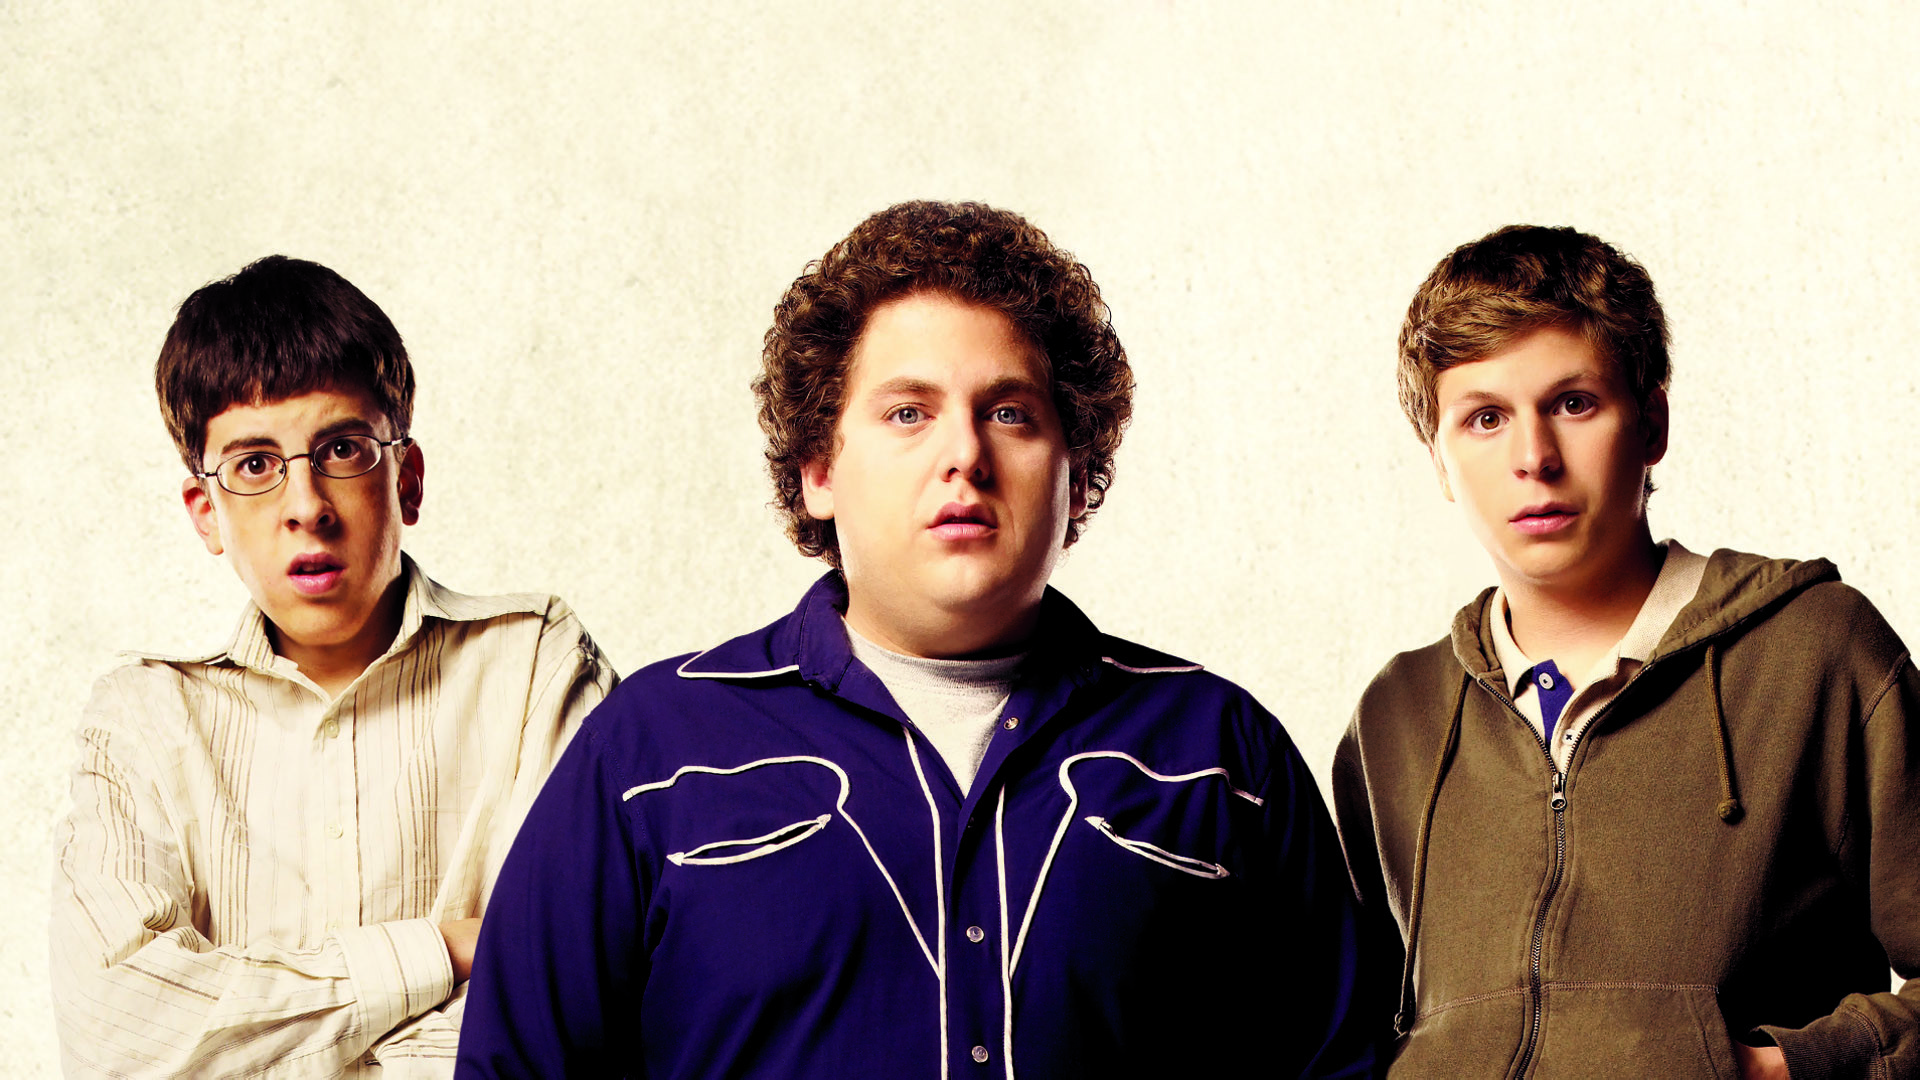 Nice wallpapers Superbad 1920x1080px